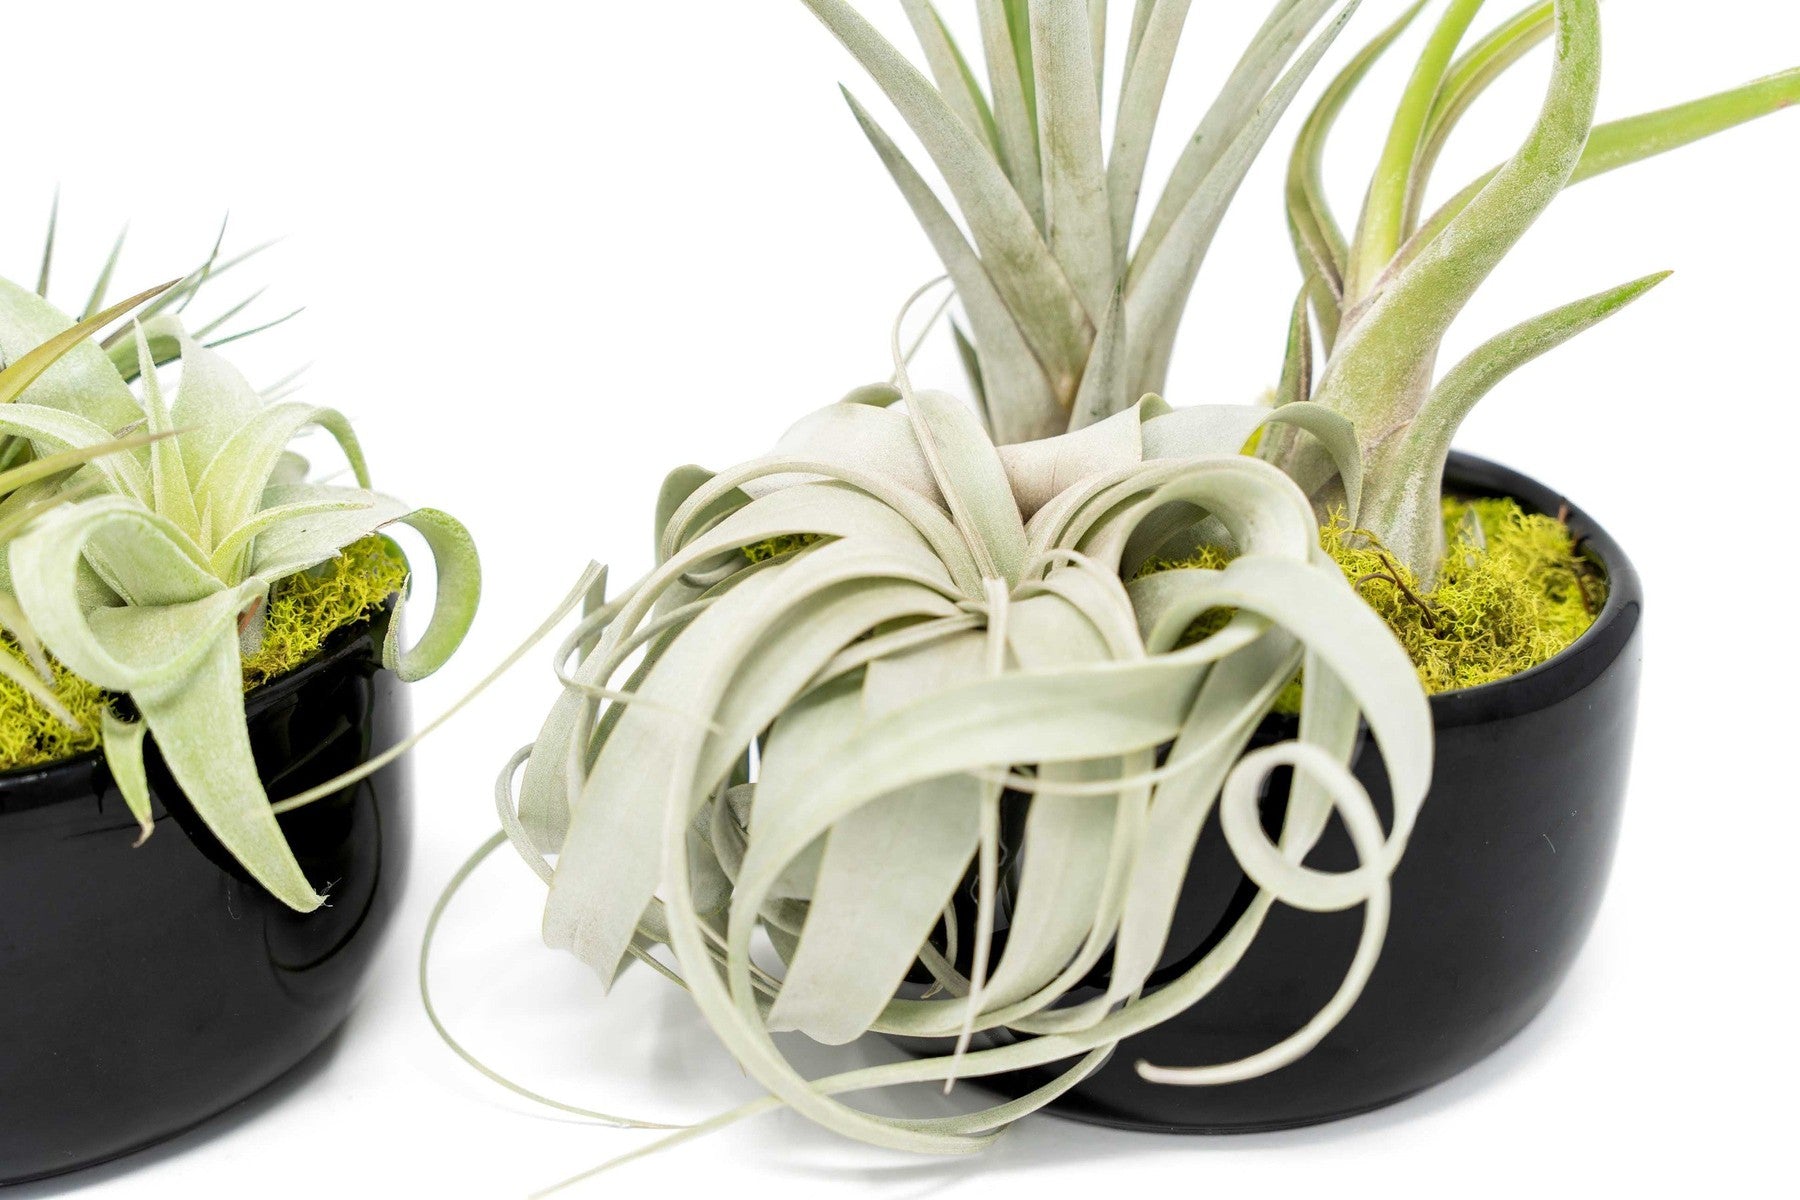 Large Fully Assembled Air Plant Bowl Garden-The Succulent Source